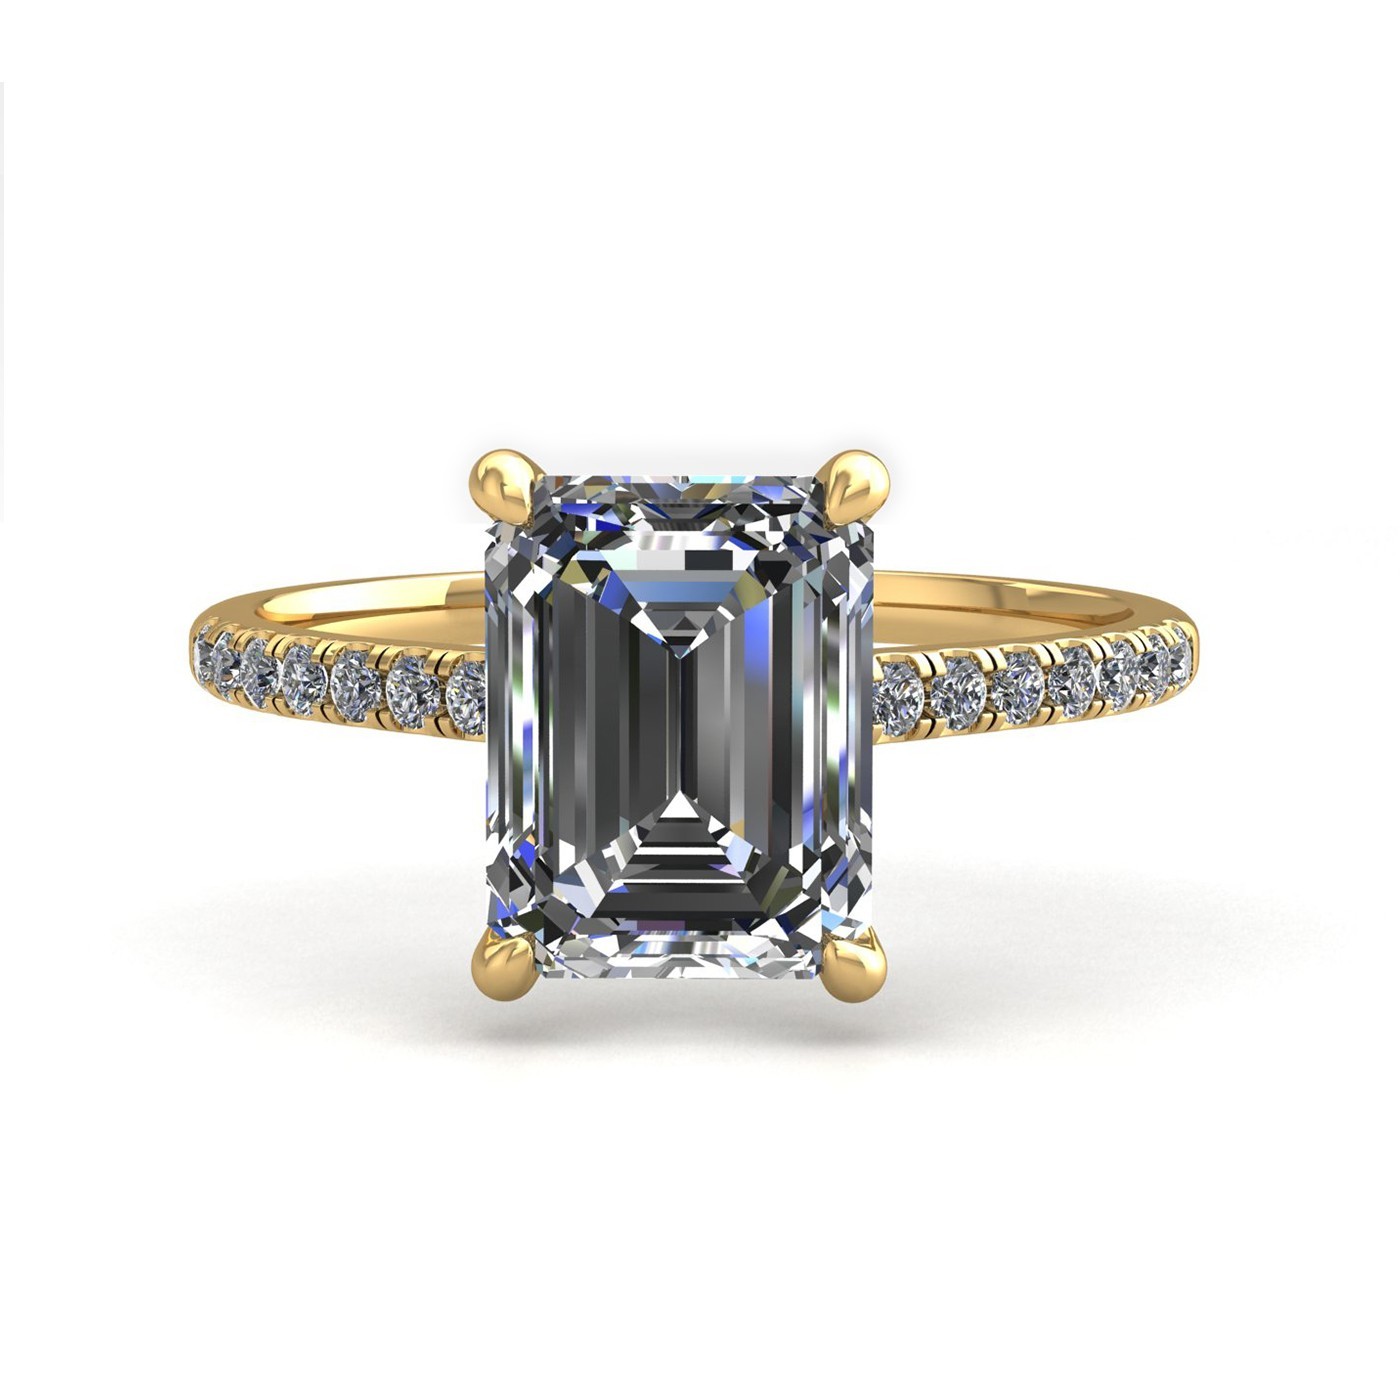 18k yellow gold 1.5ct 4 prongs emerald cut diamond engagement ring with whisper thin pavÉ set band Photos & images